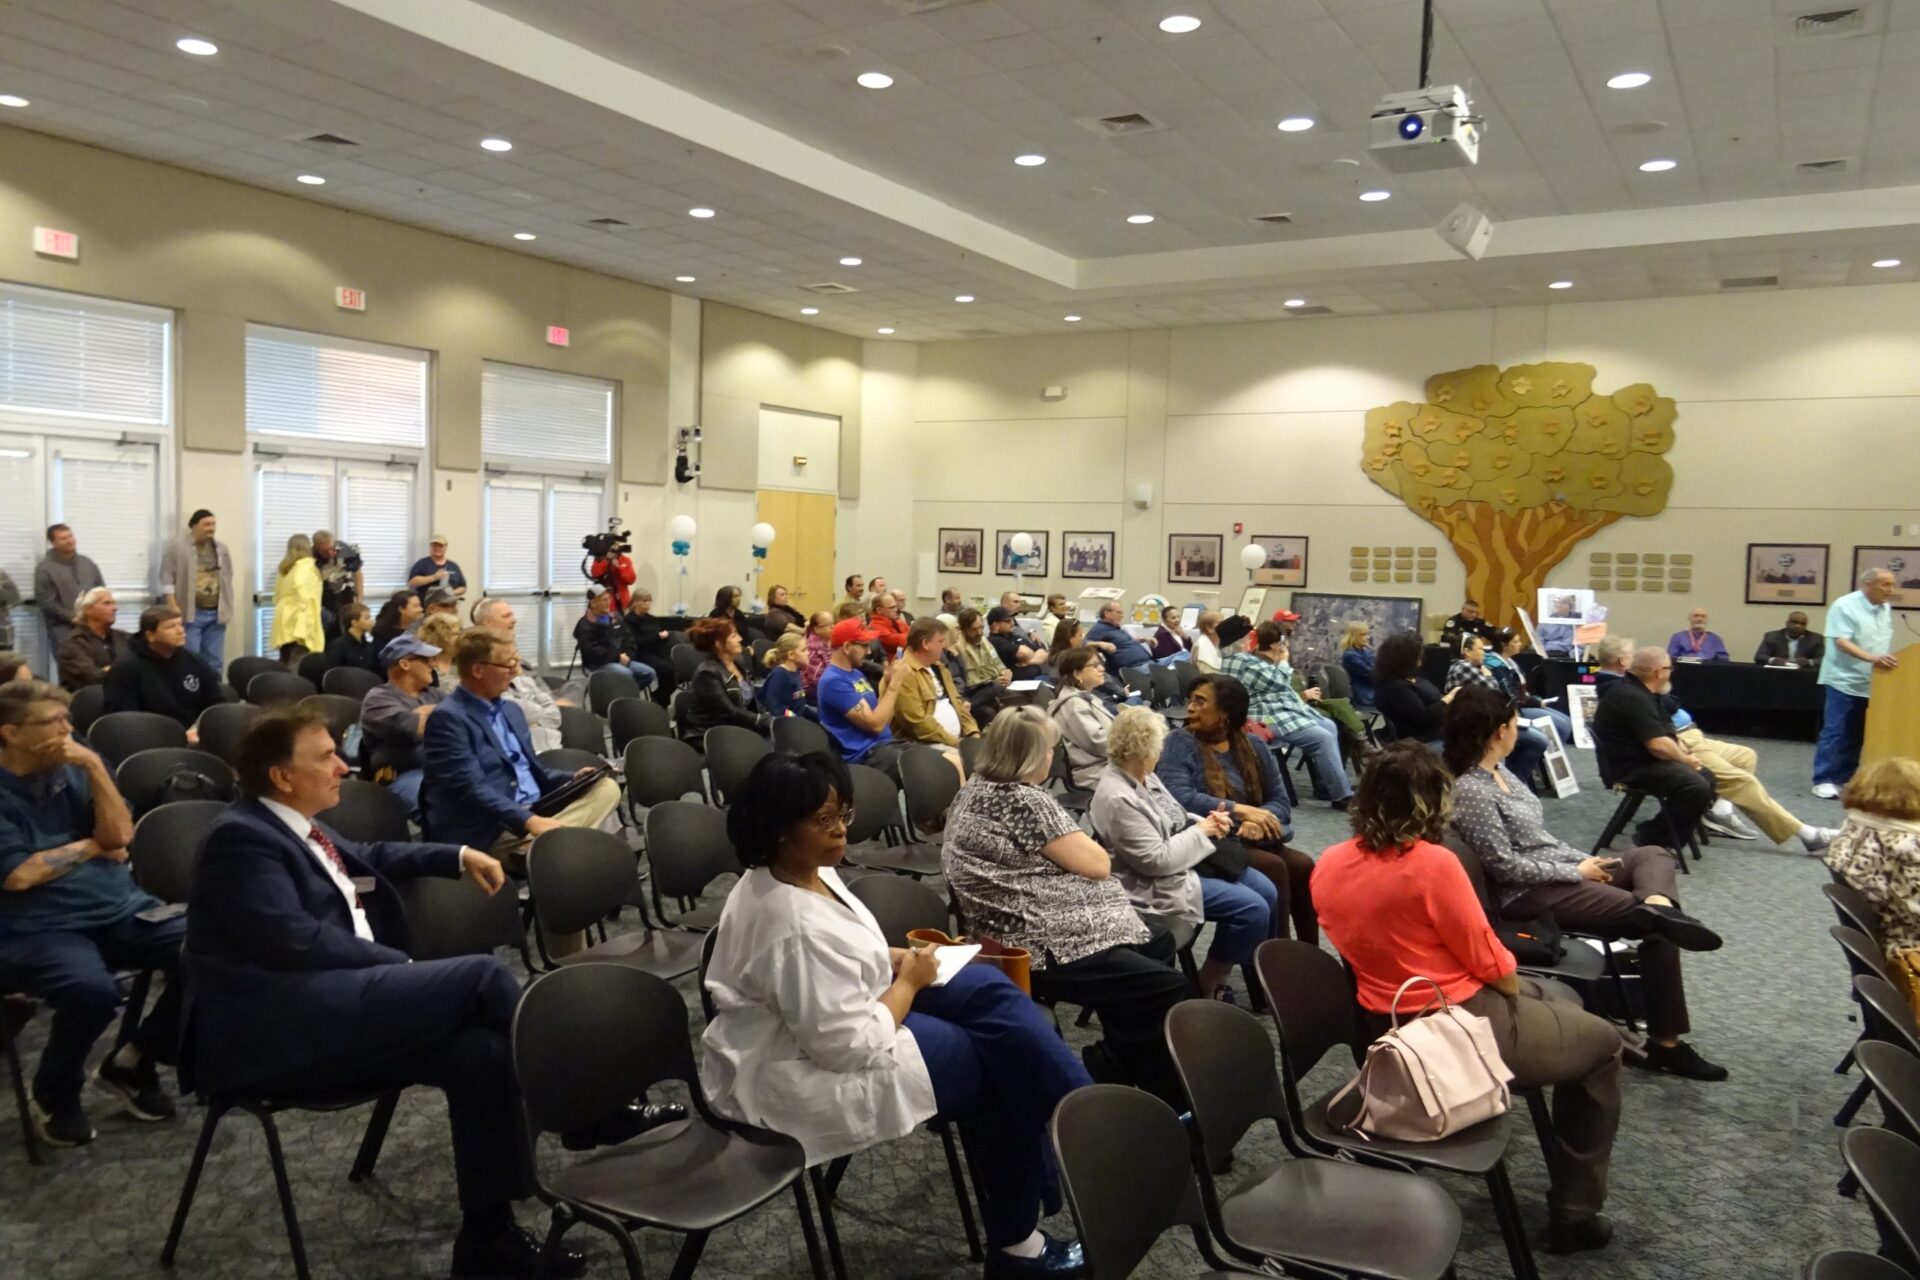 The crowd at Deltona's Jan. 28 special meeting called to act on City Manager Jane Shang’s resignation.